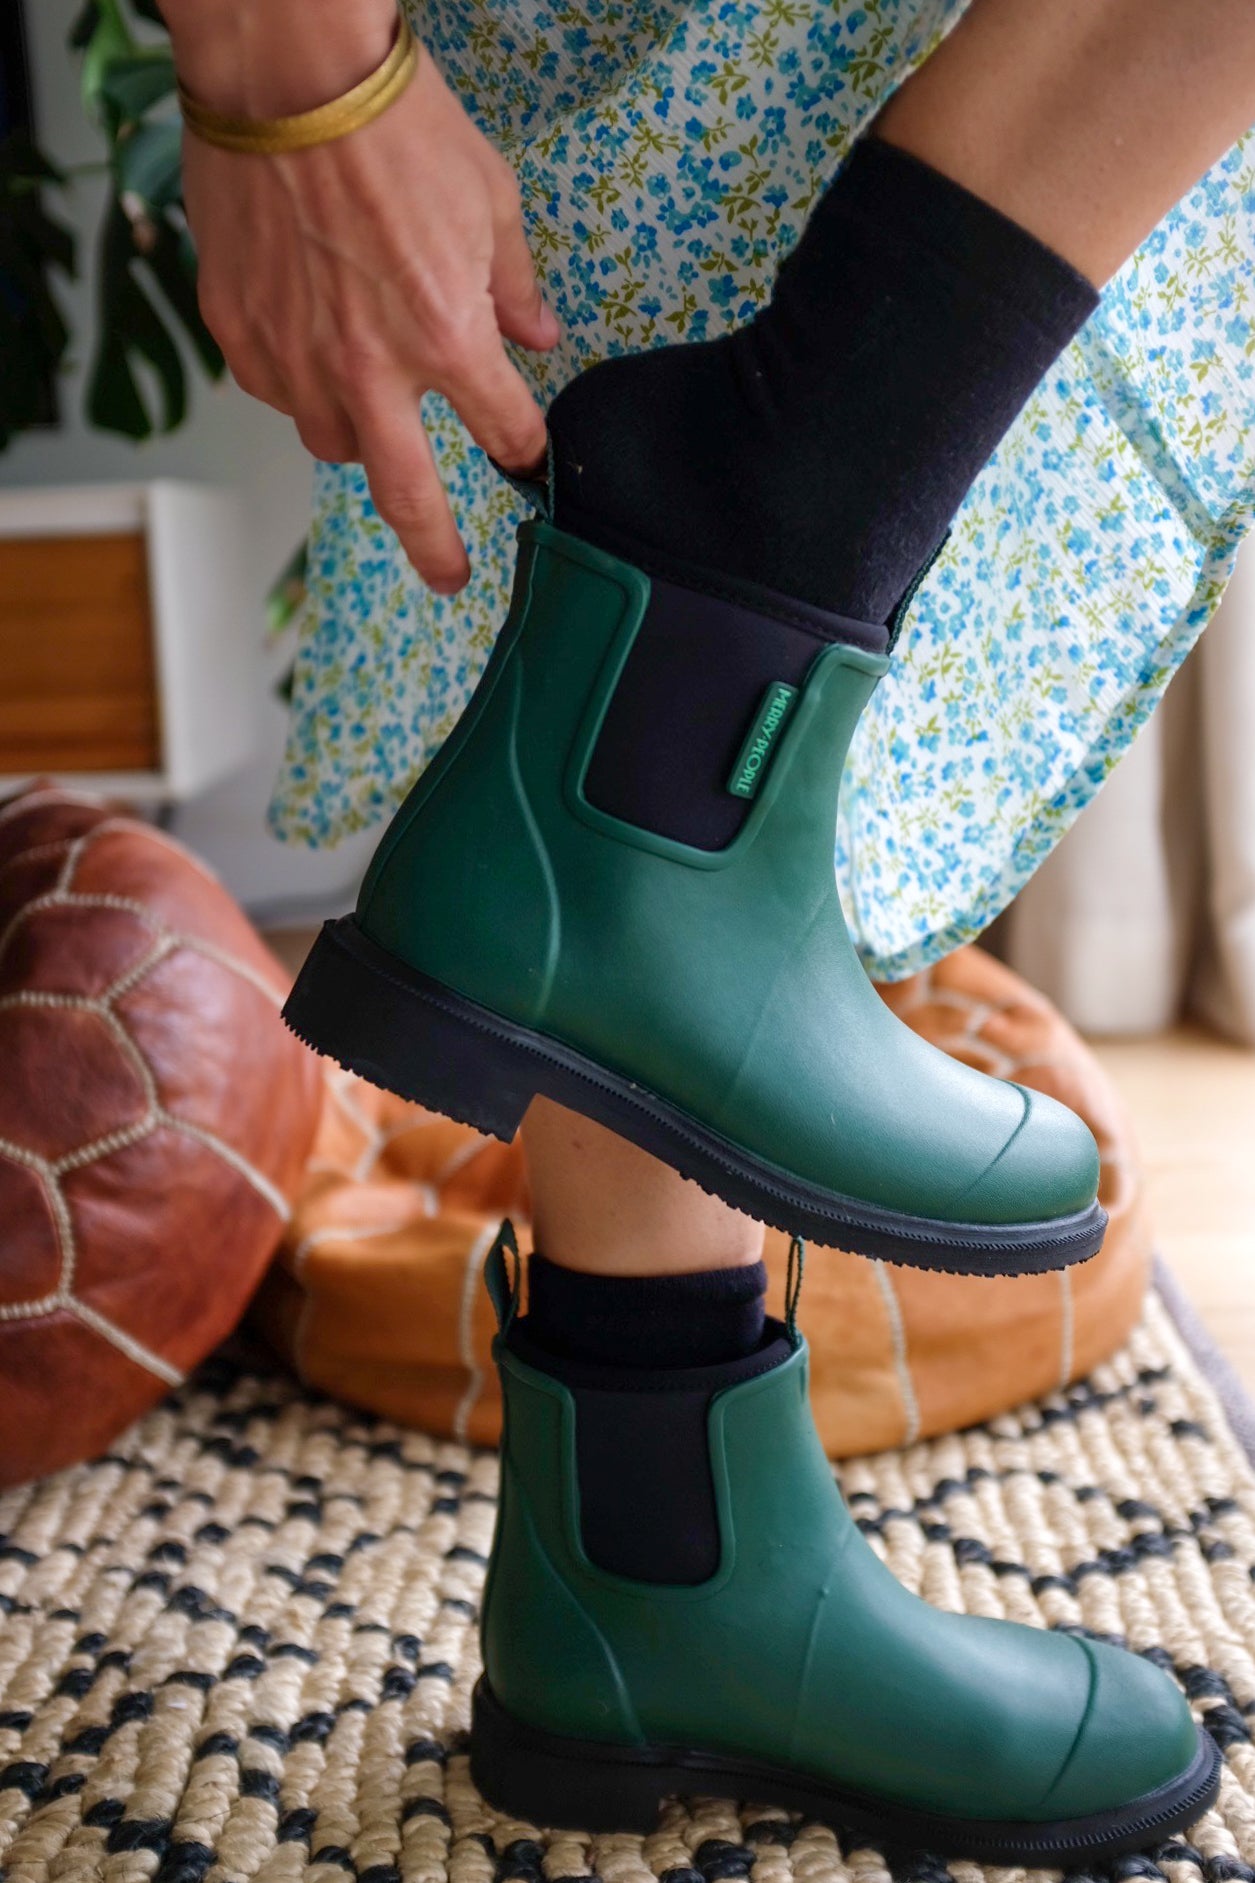 What Size Wellies Should I Buy? - Merry People UK